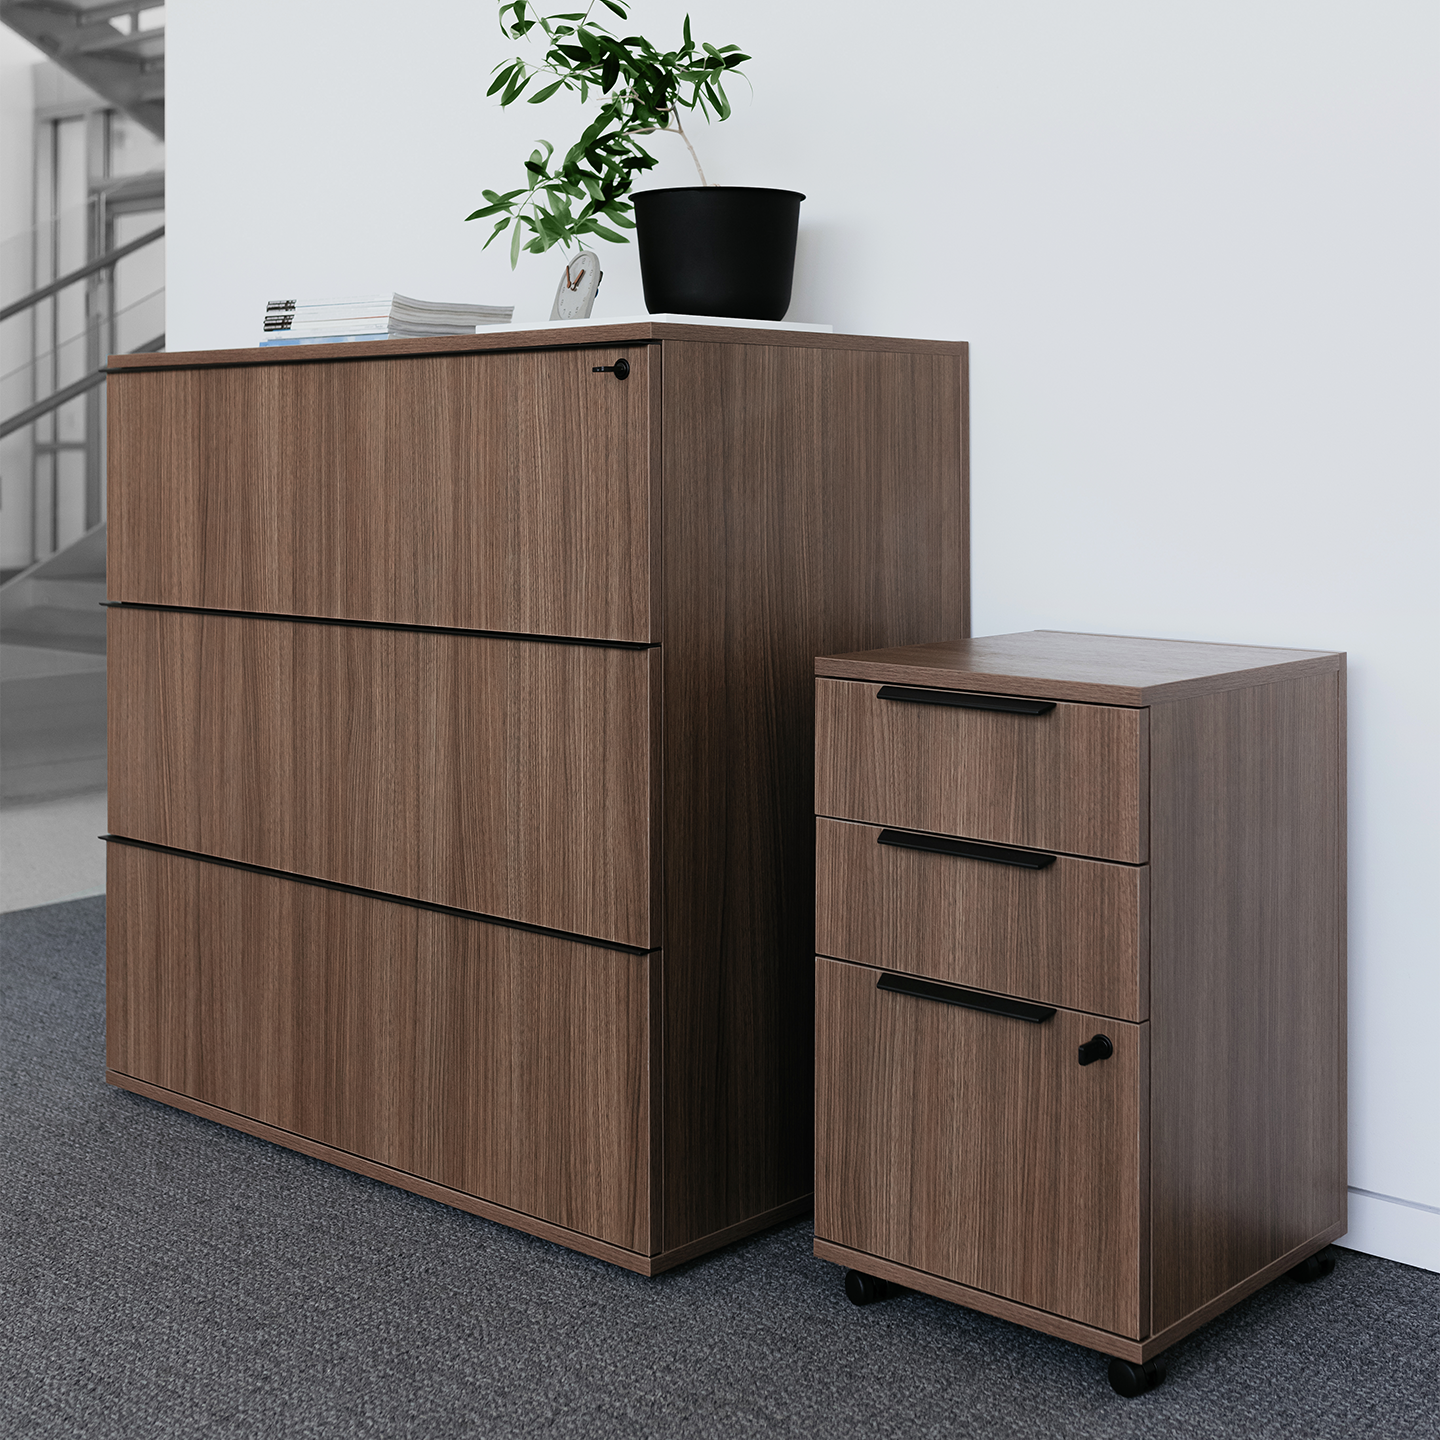 Be_Hold Be 3-high lateral file and mobile pedestal in walnut woodgrain laminate